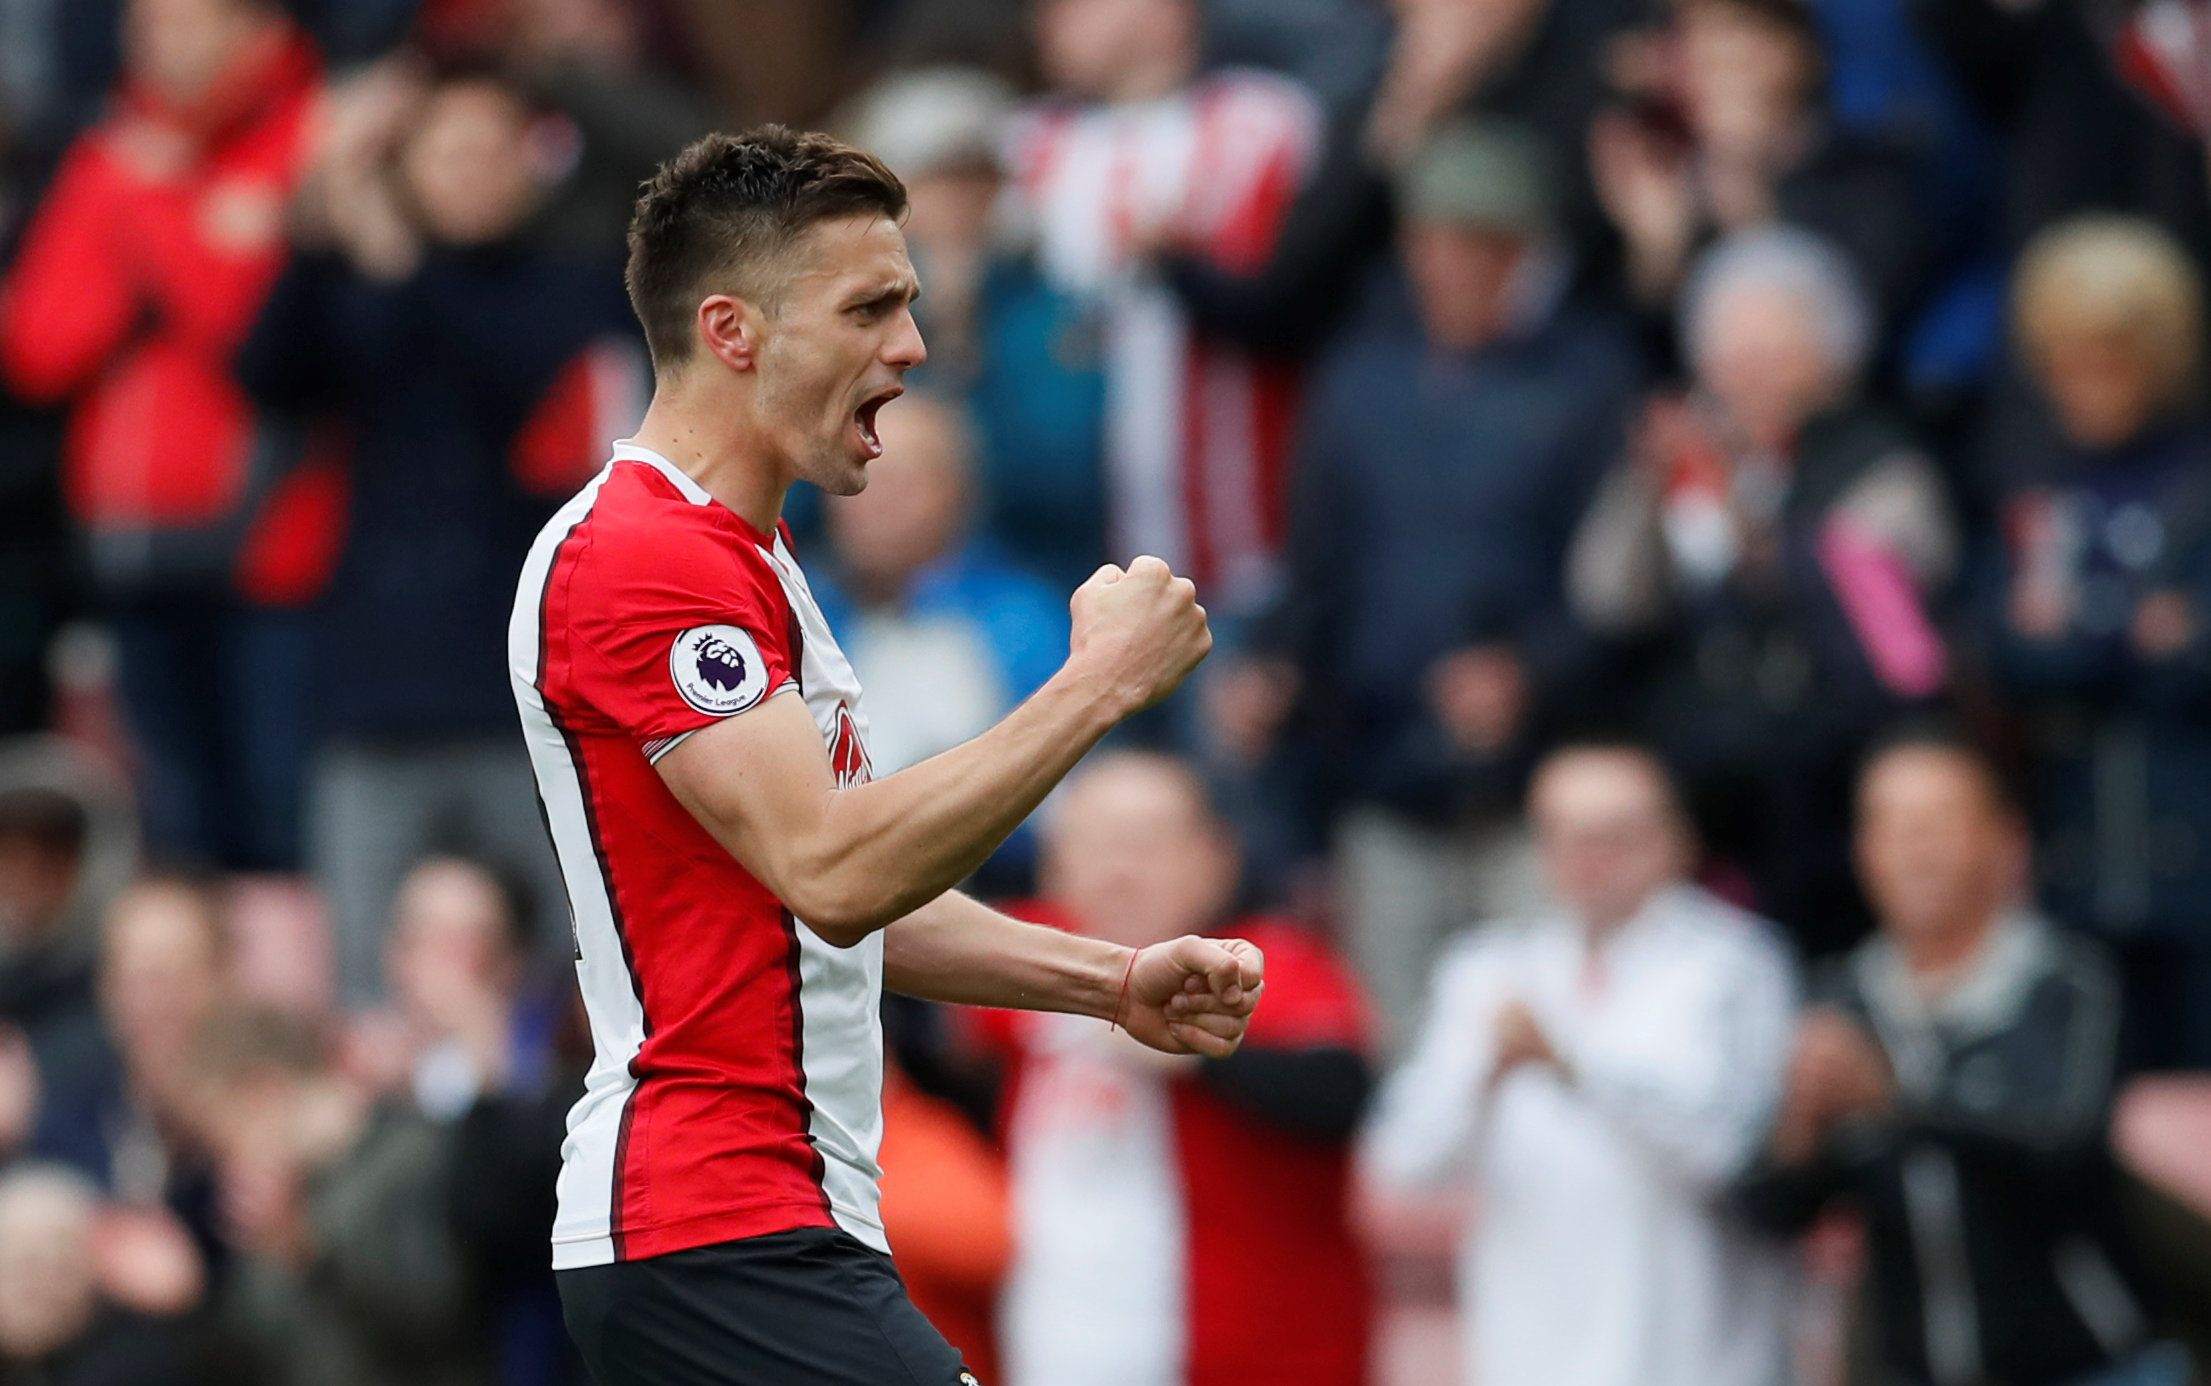 Soccer Football - Premier League - Southampton v AFC Bournemouth - St Mary's Stadium, Southampton, Britain - April 28, 2018   Southampton's Dusan Tadic celebrates at the end of the match    REUTERS/David Klein    EDITORIAL USE ONLY. No use with unauthorized audio, video, data, fixture lists, club/league logos or "live" services. Online in-match use limited to 75 images, no video emulation. No use in betting, games or single club/league/player publications.  Please contact your account representa